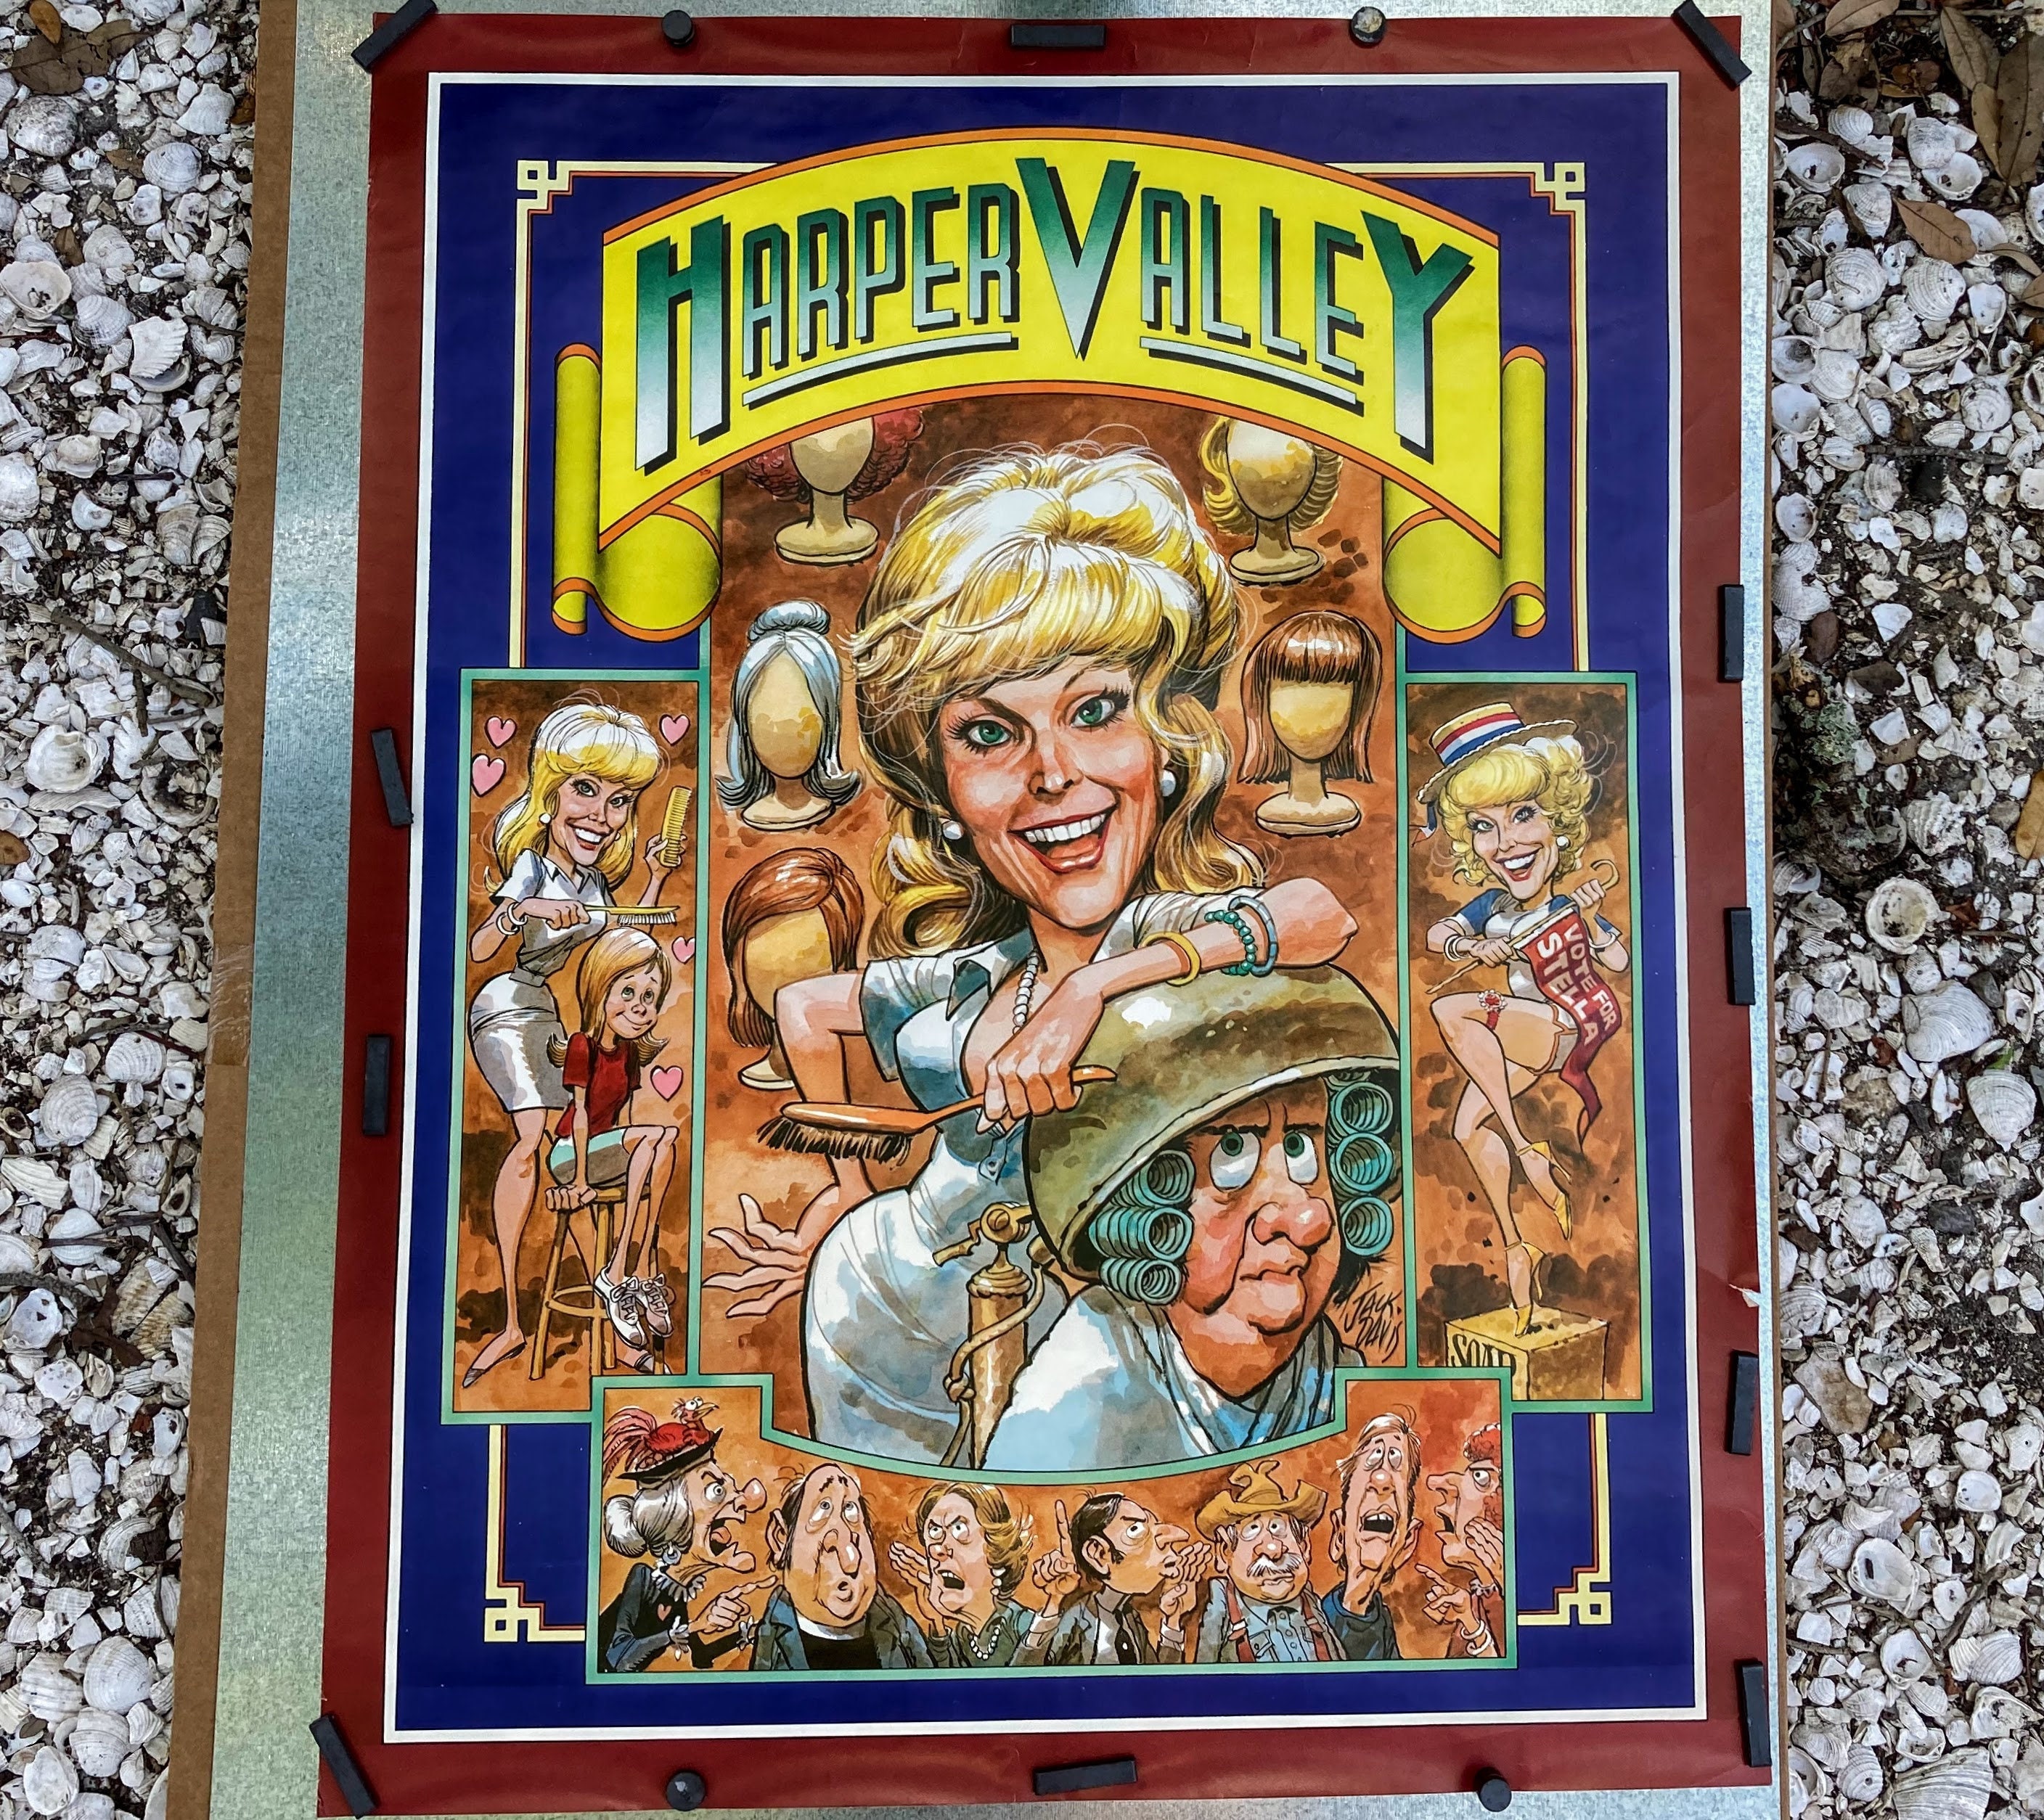 80s Sitcom Pilot Poster, 22 x 28, Harper Valley w Barbara Eden, Print on Card Stock, Semi Gloss Finish, Ready for Your Frame